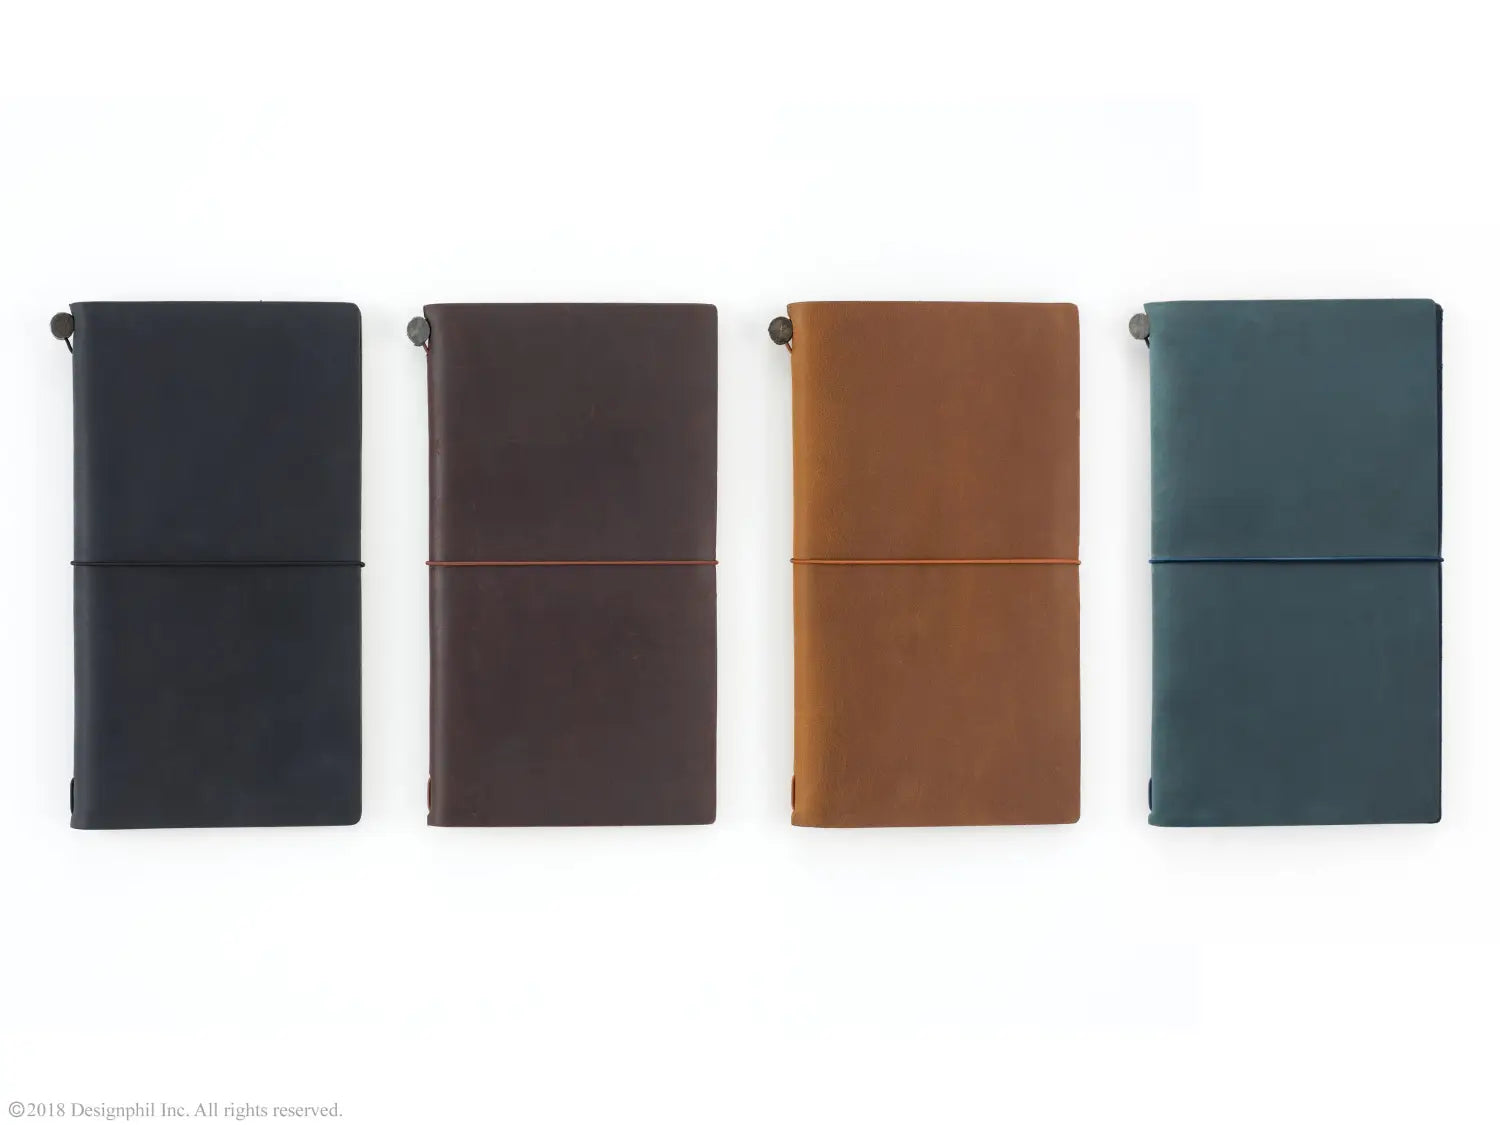 TRAVELER'S notebook covers